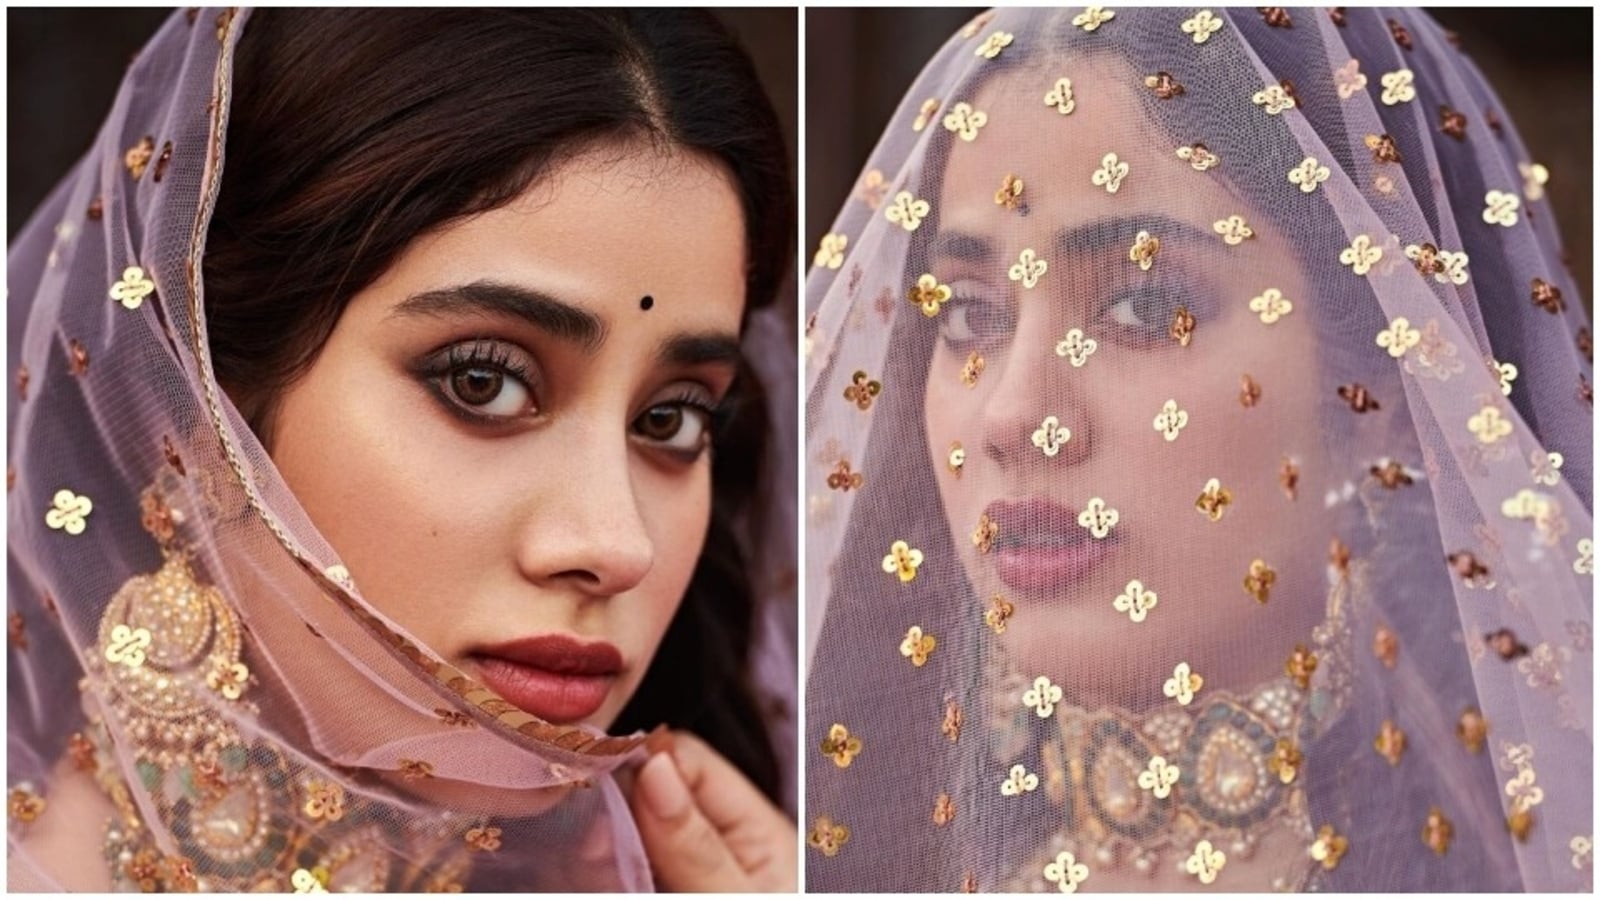 Janhvi Kapoor lives her vintage royal dreams in dreamy ethnic outfits,  internet is in love with her period photos | Hindustan Times